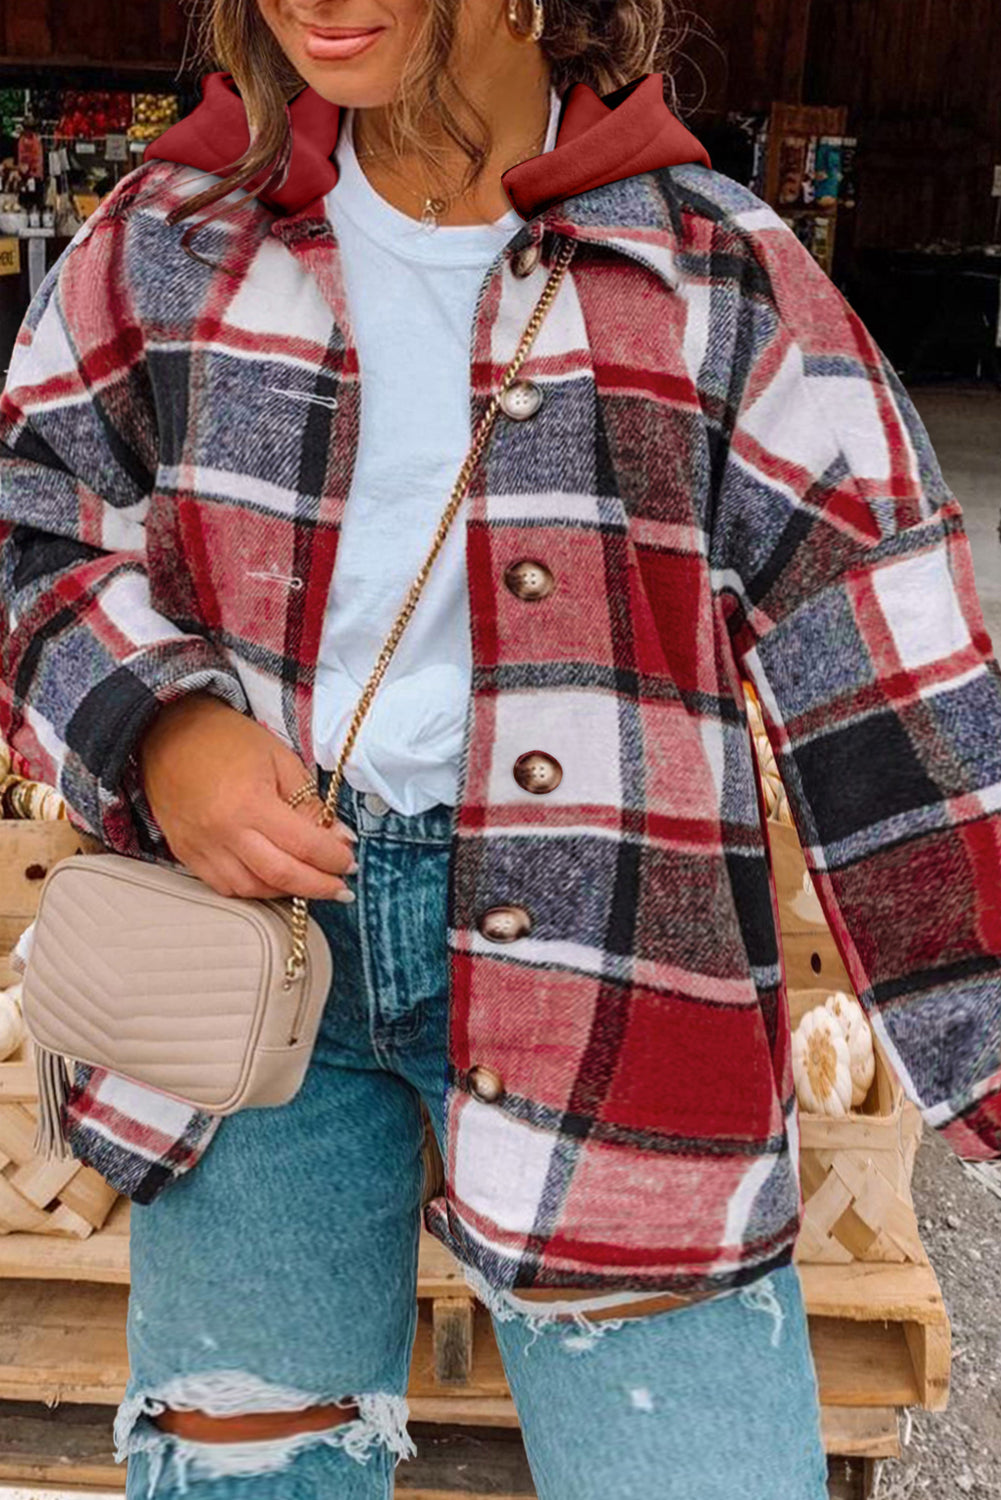 Red Plus Size Plaid Button Up Hooded Jacket